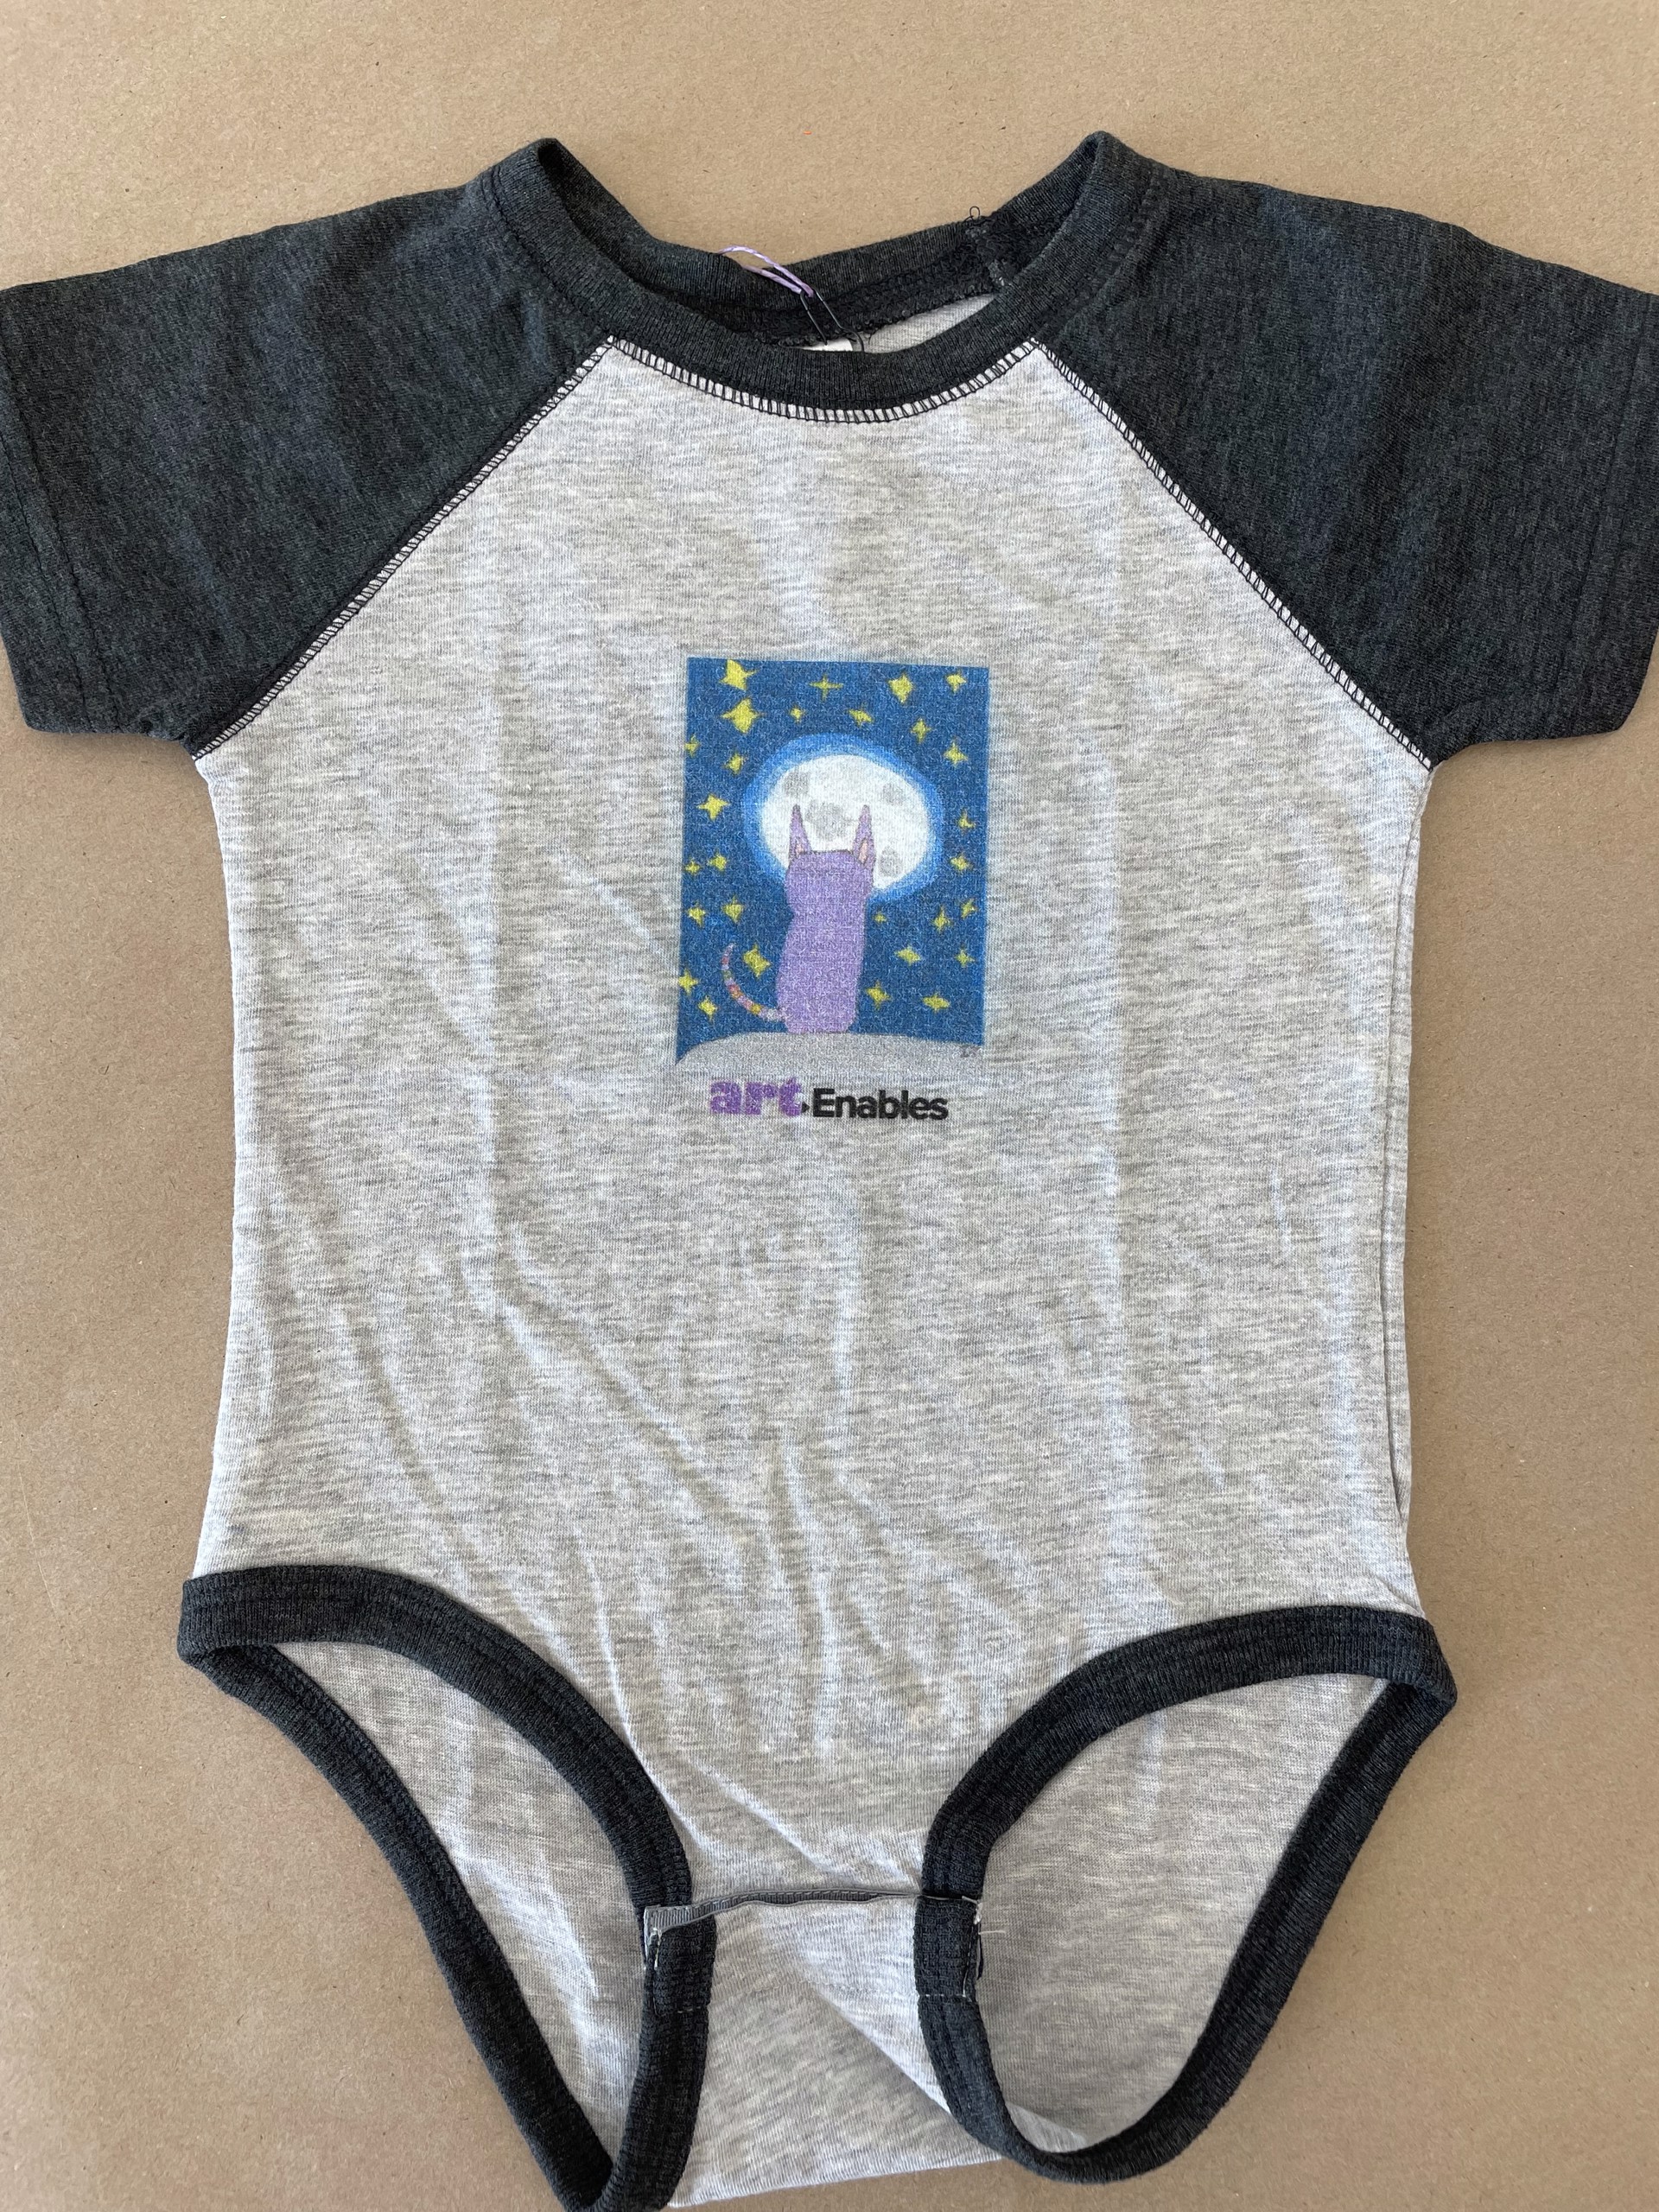 Baby Onesie (baseball-style, artwork by Imani Turner) 6 mo - charcoal heather gray by Art Enables Merchandise